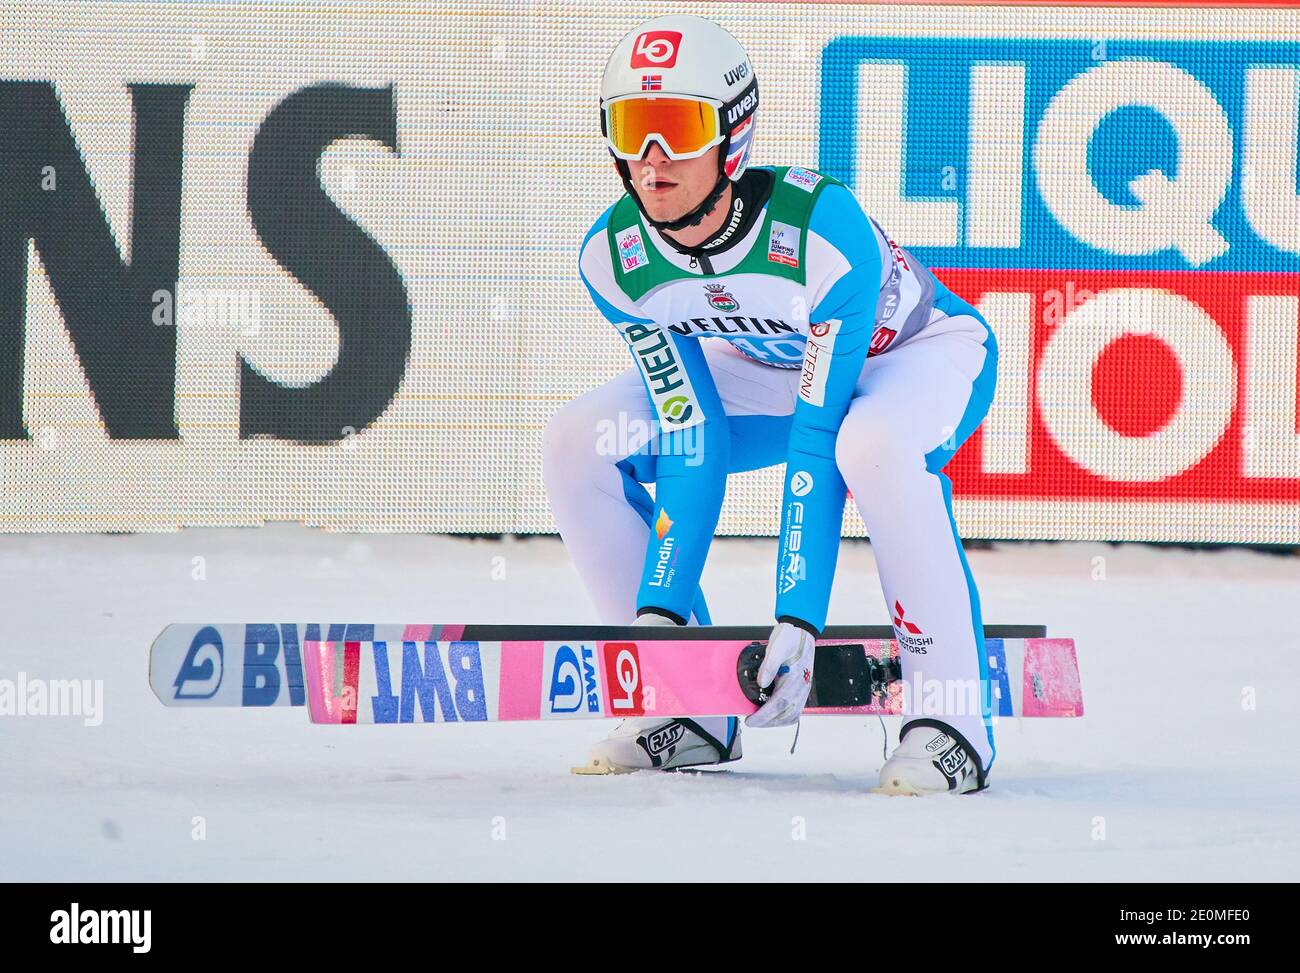 Daniel Andre TANDE, NOR in action at the Four Hills Tournament Ski Jumping at Olympic Stadium, Grosse Olympiaschanze in Garmisch-Partenkirchen, Bavaria, Germany, January 01, 2021.  © Peter Schatz / Alamy Live News Stock Photo